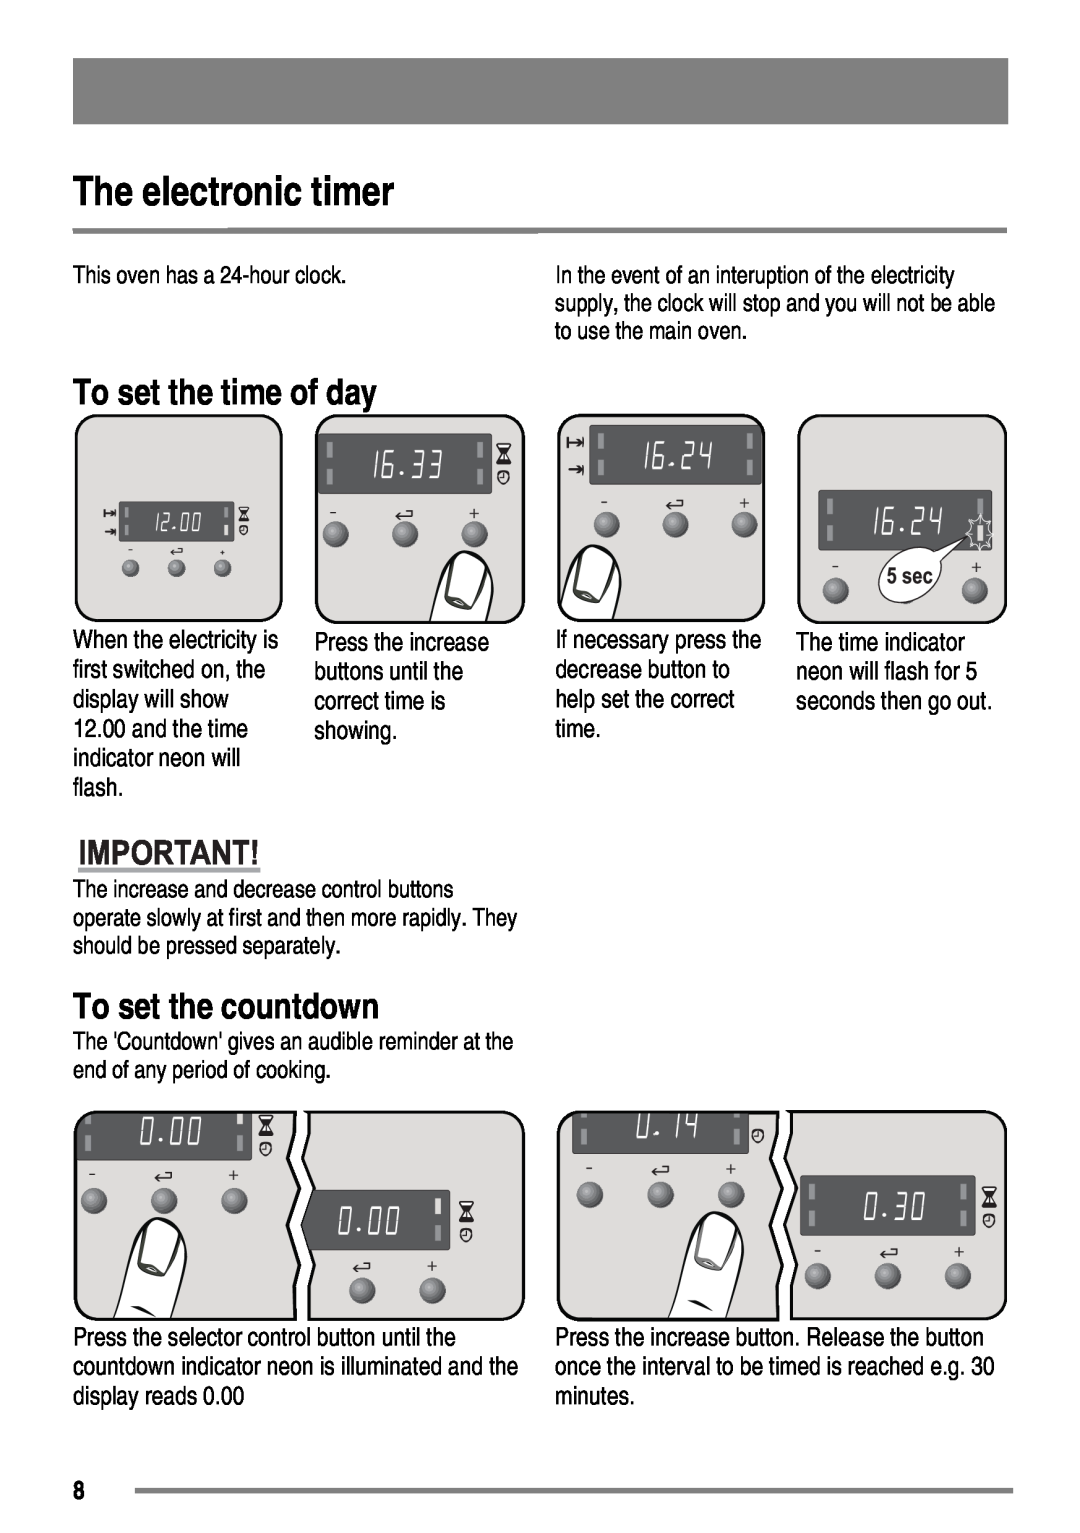 Tricity Bendix SE558 user manual The electronic timer, To set the time of day, To set the countdown 